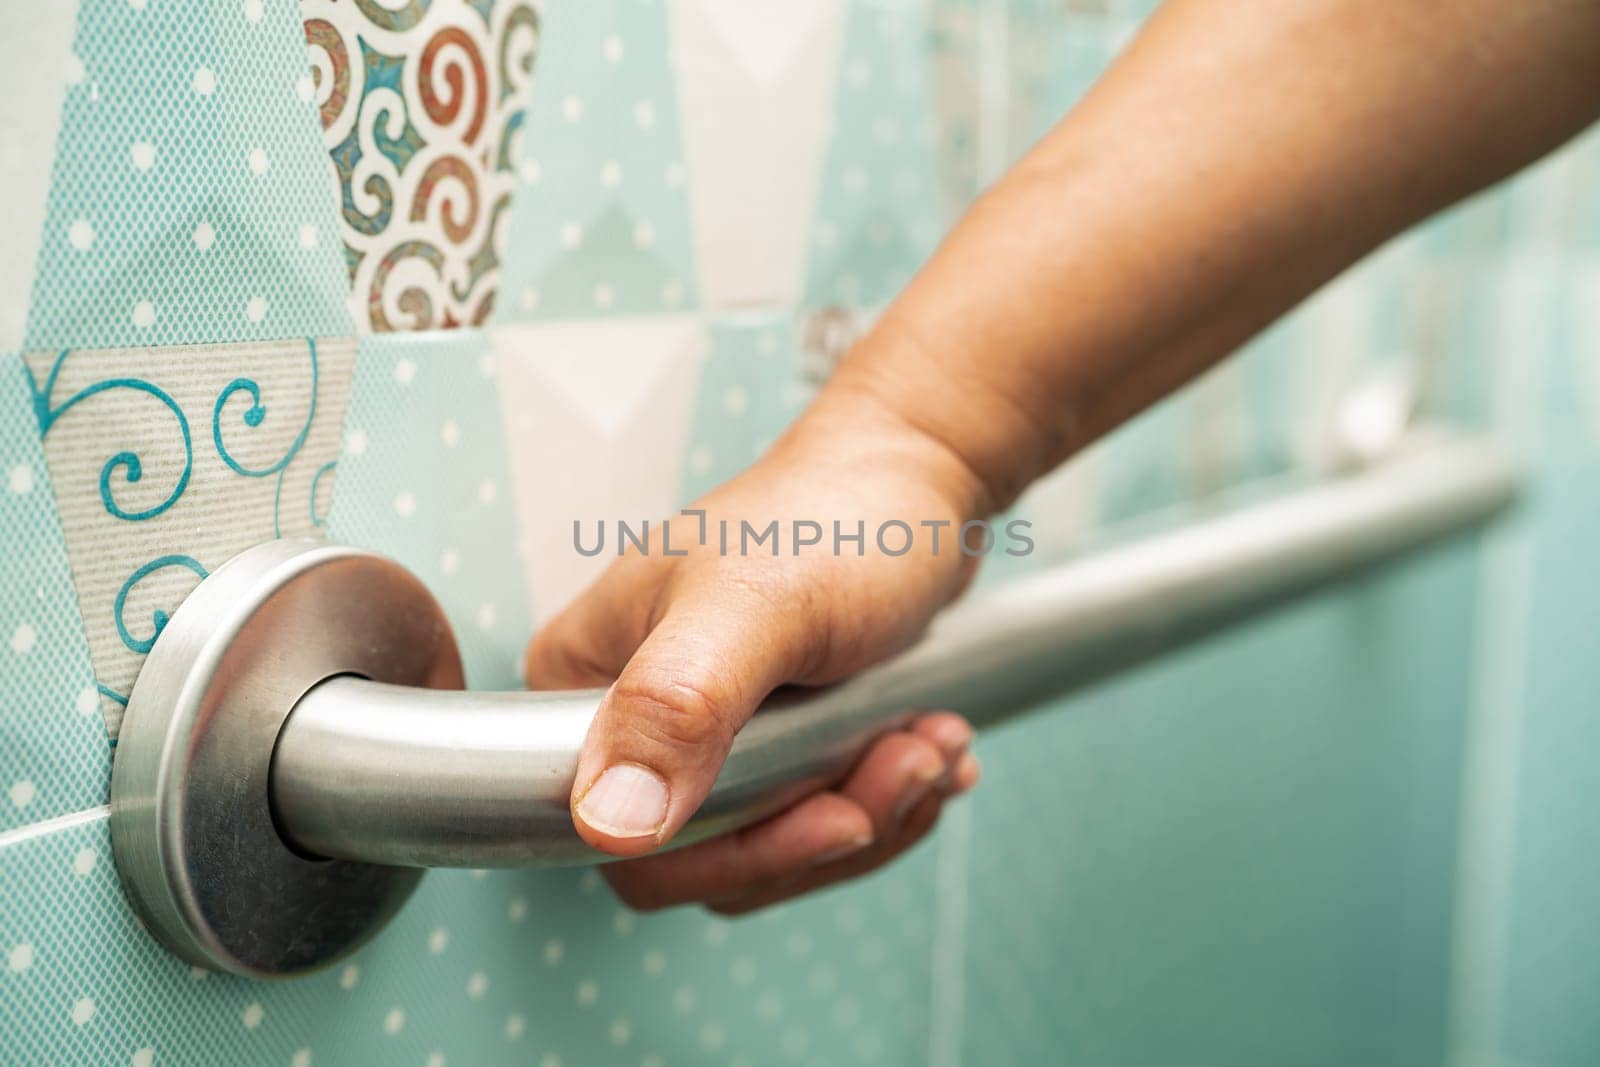 Asian elderly woman use bathroom handle security in toilet, healthy strong medical concept. by pamai